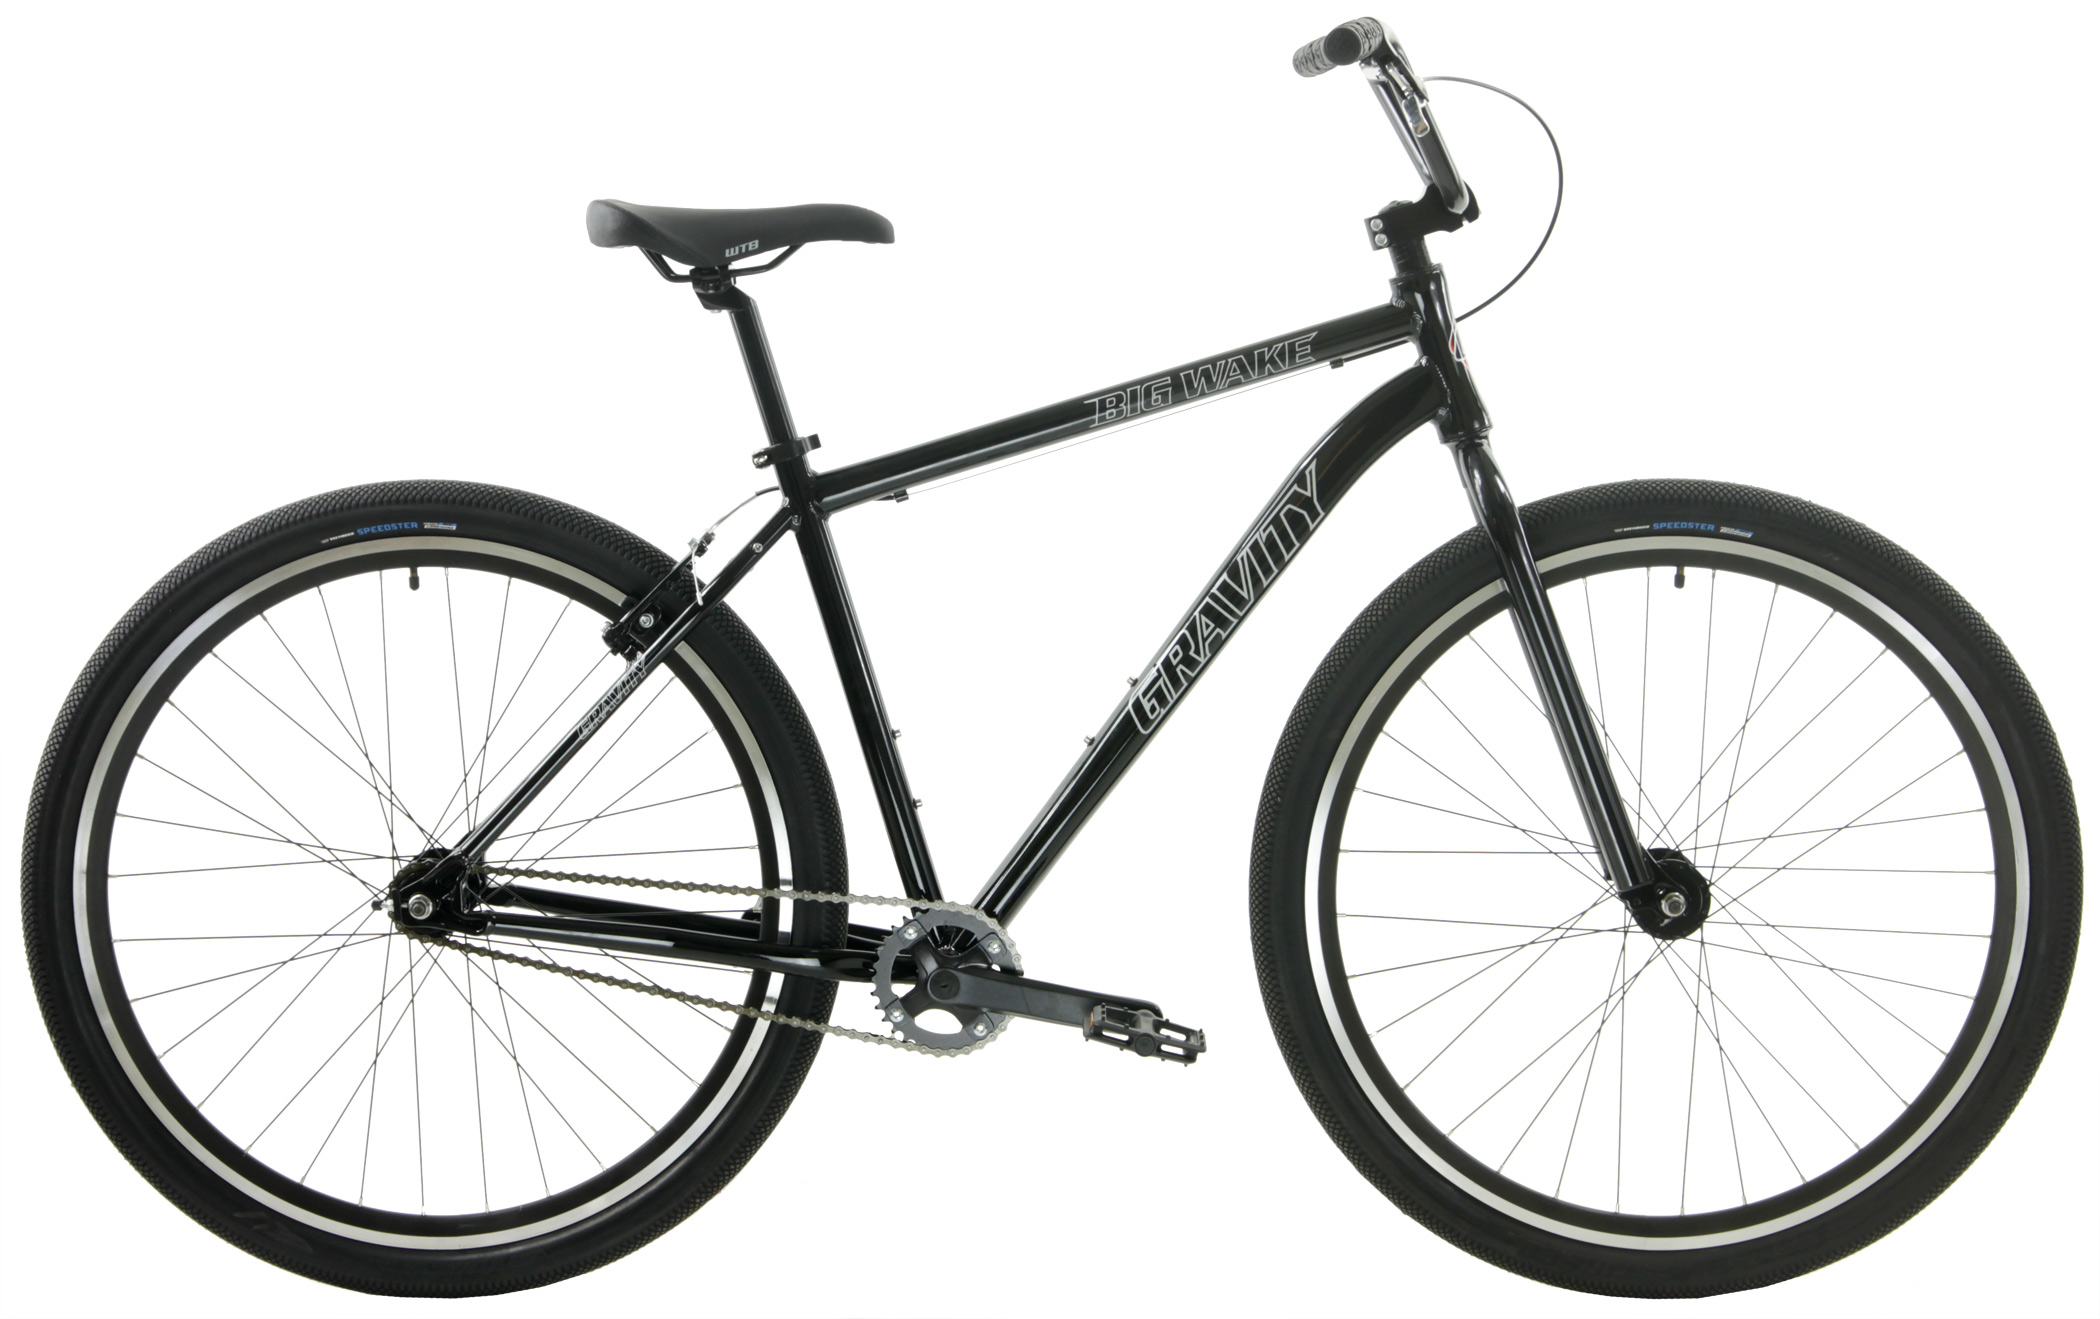 Mourn sandwich Devastate Save up to 60% off new Adult BMX ALL BIKES FREE SHIP 48 Save Up to 60% Off  Gravity Big Wake Bicycles Single Speed Adult BMX Bikes, BMX Cruiser Bikes  Fast, Strong